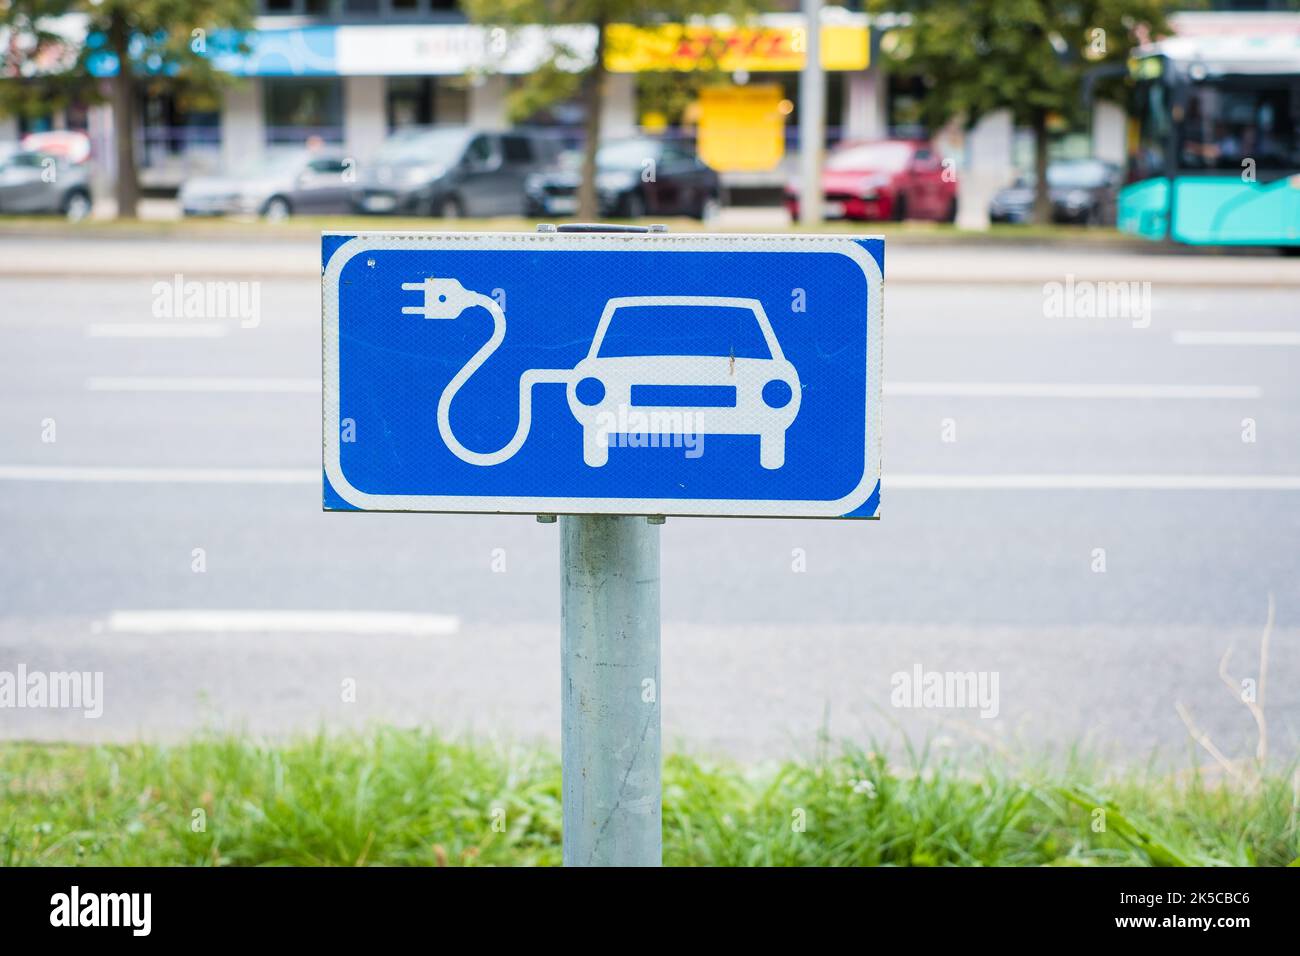 Public electrical vehicle charging point traffic sign. Stock Photo